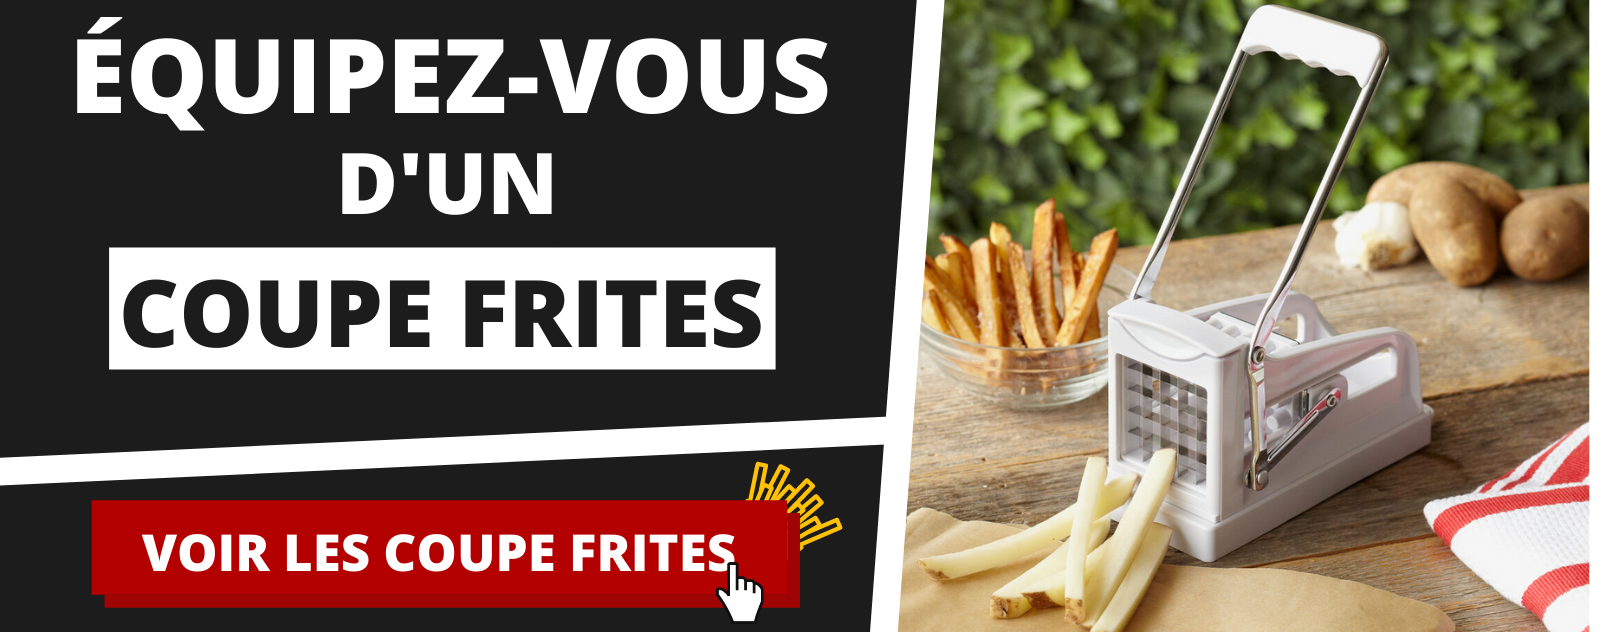 Coupe frites ancien - Octo-Puces